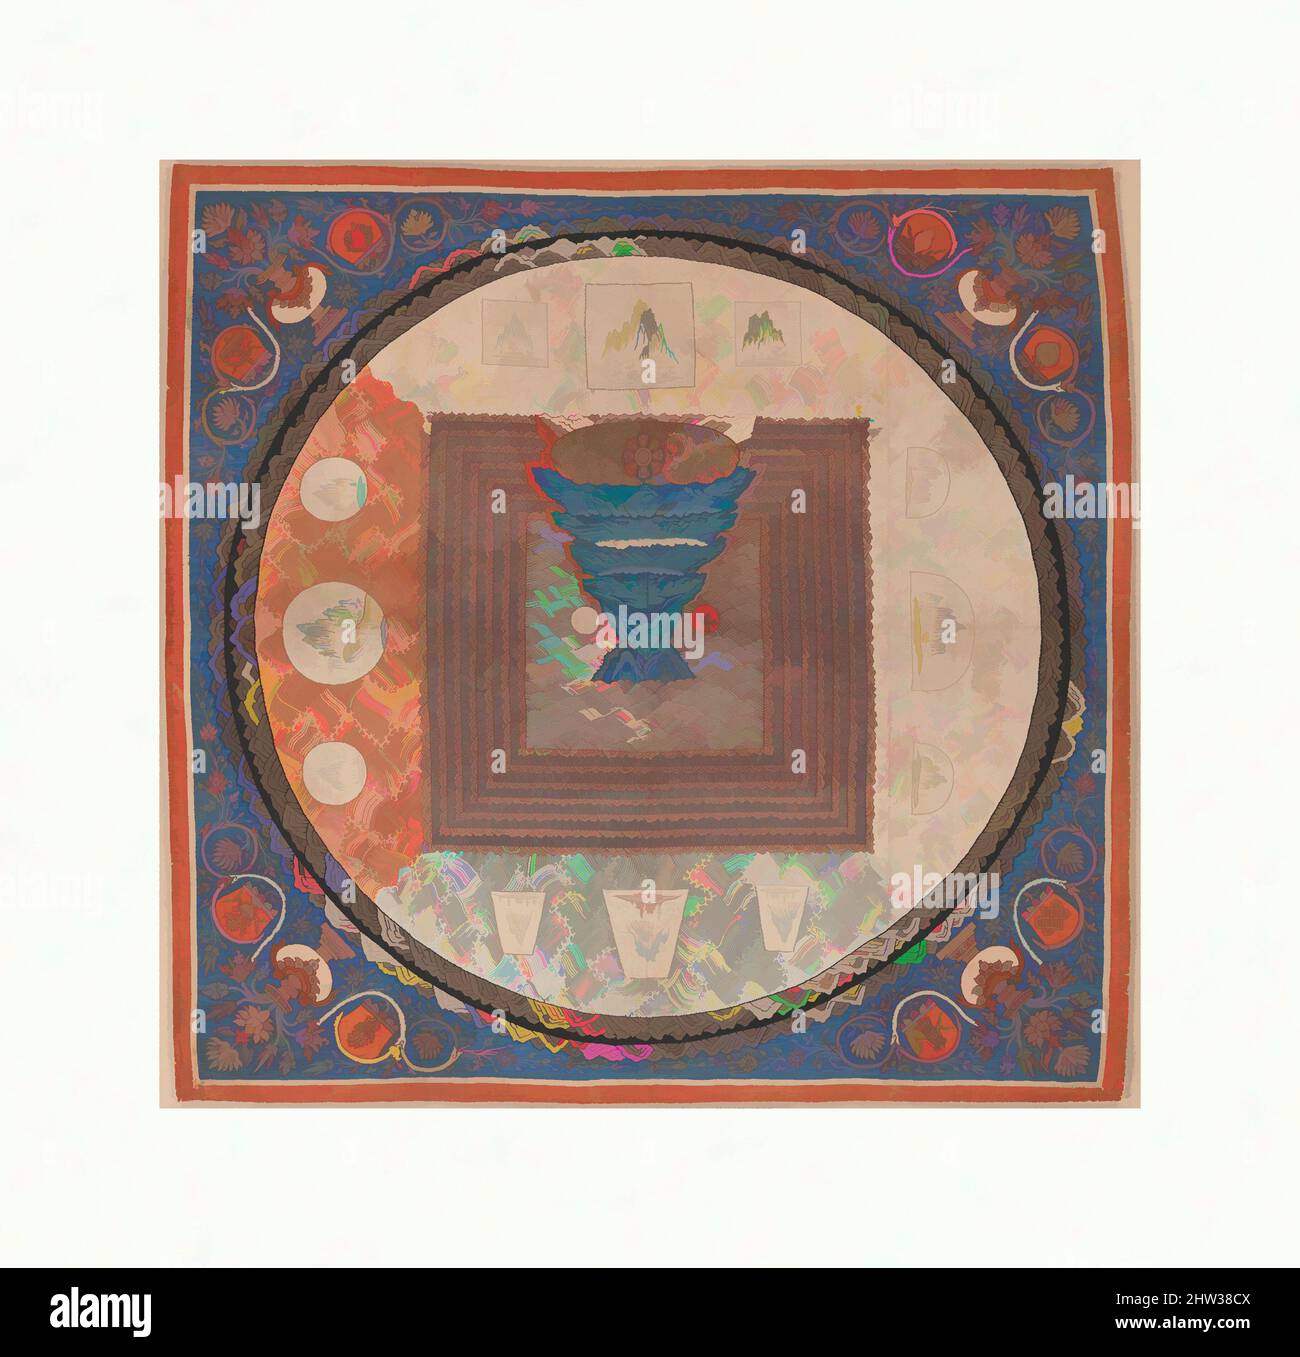 Art inspired by 元 緙絲 須彌山曼陀羅, Cosmological Mandala with Mount Meru, Yuan dynasty (1271–1368), 14th century, China, Silk tapestry (kesi), Overall: 33 x 33 in. (83.8 x 83.8cm), Textiles-Tapestries, The elaborate tapestry-woven mandala, or cosmic diagram, illustrates Indo-Himalayan imagery, Classic works modernized by Artotop with a splash of modernity. Shapes, color and value, eye-catching visual impact on art. Emotions through freedom of artworks in a contemporary way. A timeless message pursuing a wildly creative new direction. Artists turning to the digital medium and creating the Artotop NFT Stock Photo